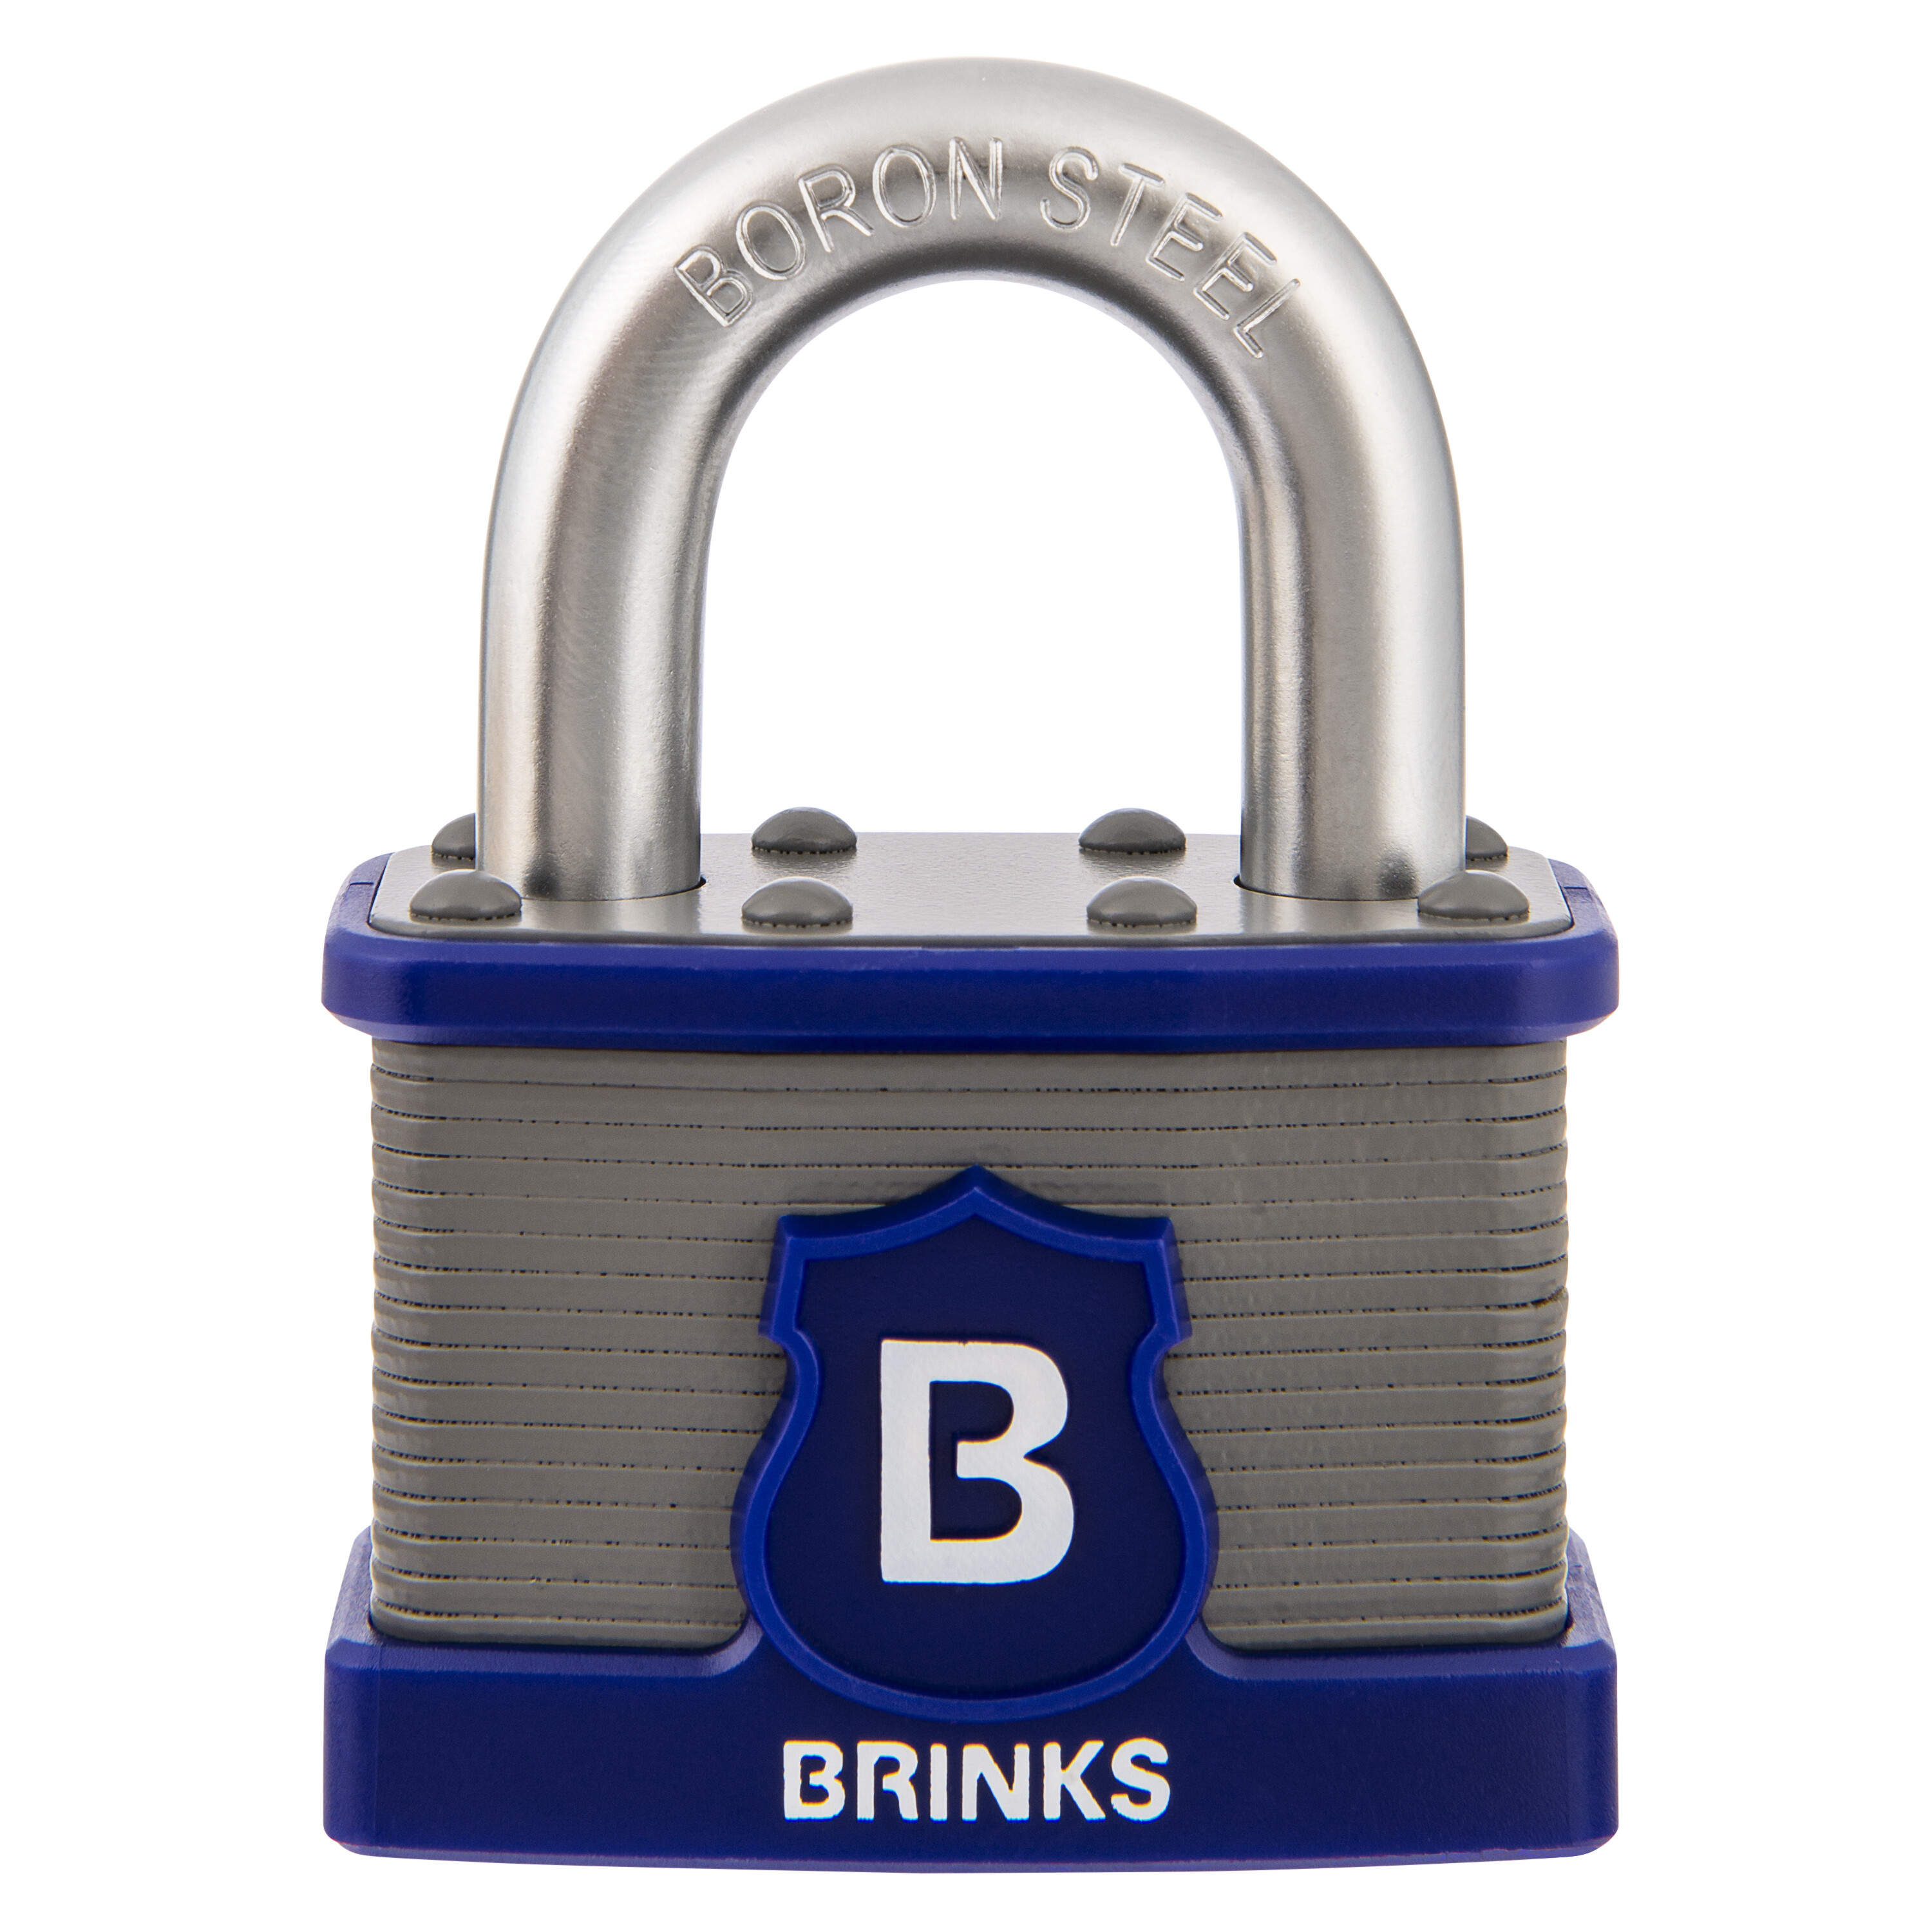 50mm Commercial Laminated Steel Padlock